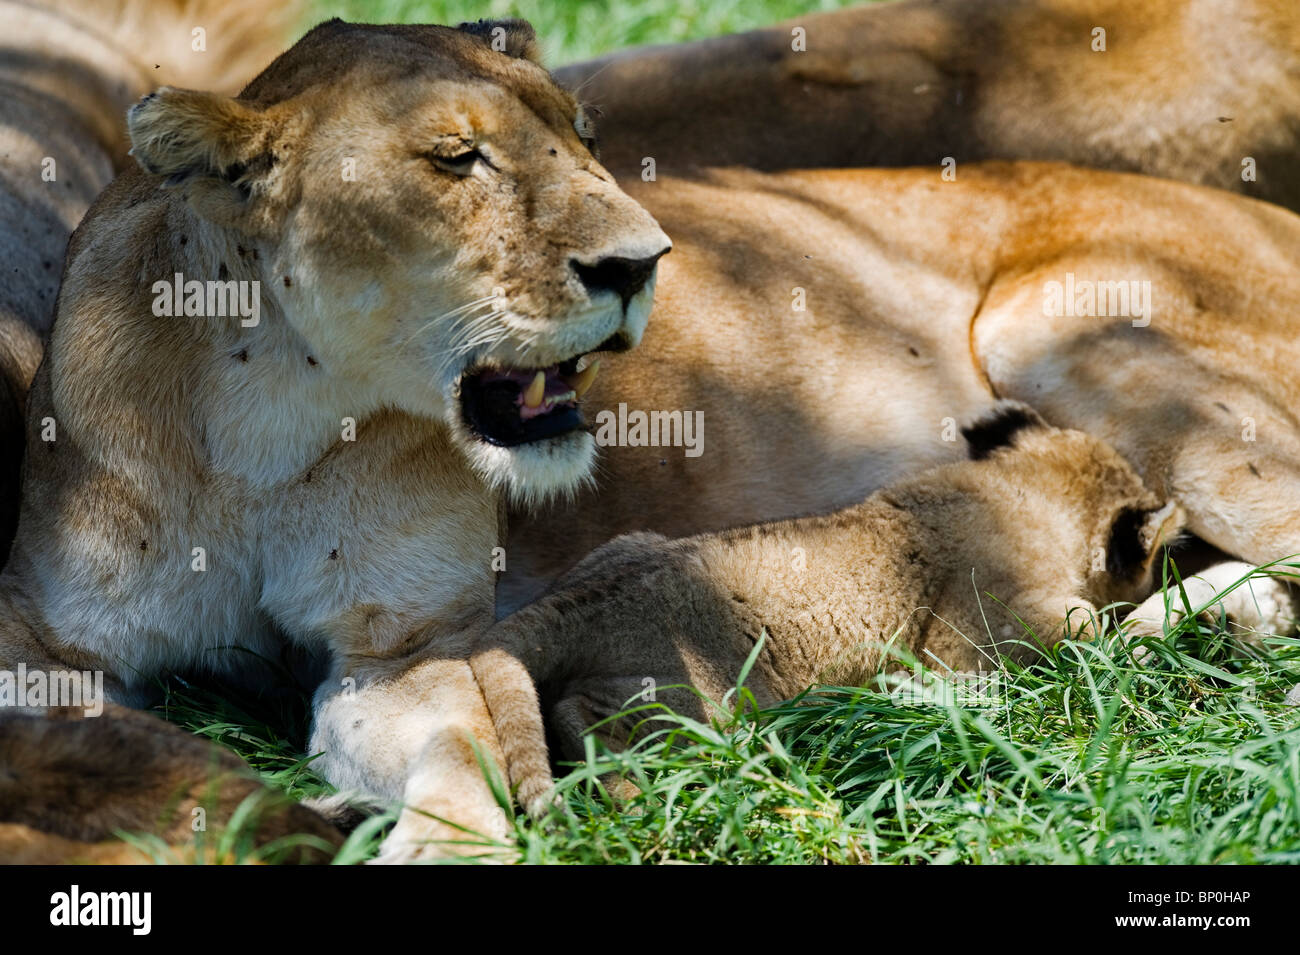 Kenya, Masai Mara. Lioness panting in the heat of the day as her cub suckles. Stock Photo